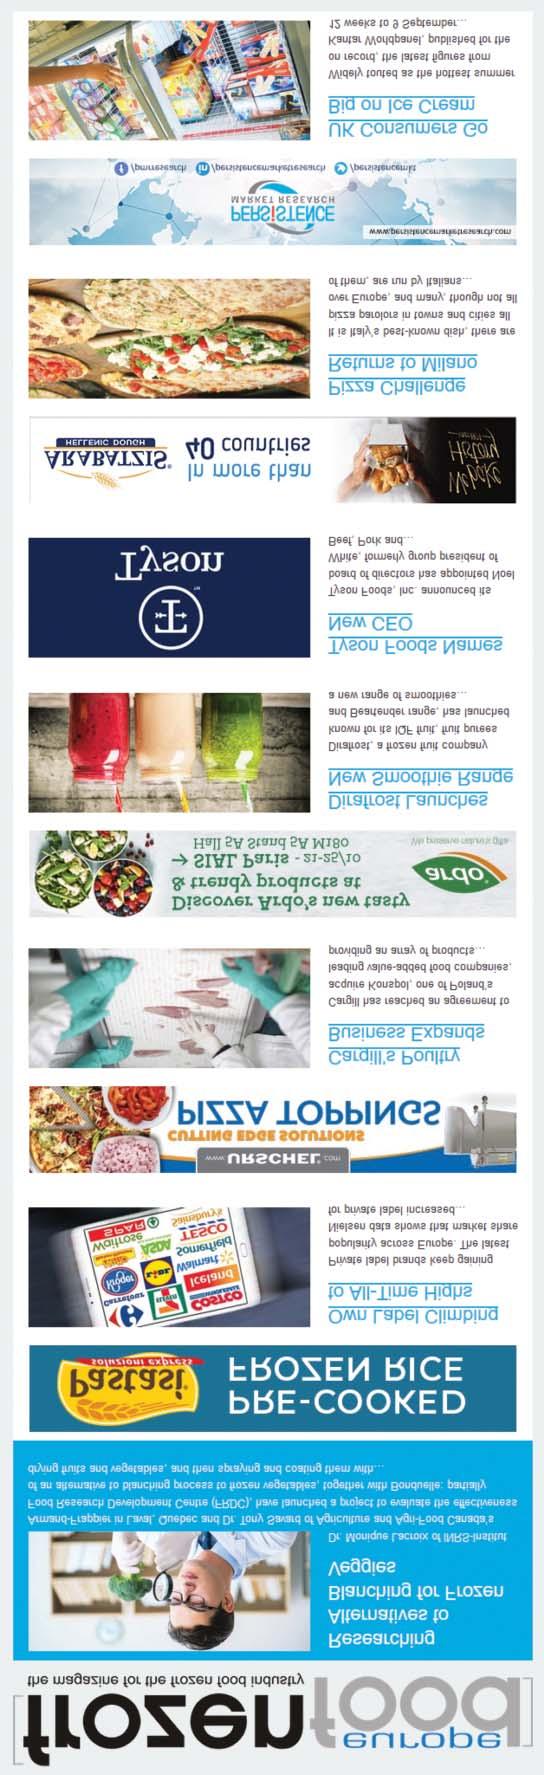 ONLINE l NEWSLETTER SERVICE Provides breaking news and the most relevant frozen food information every week.